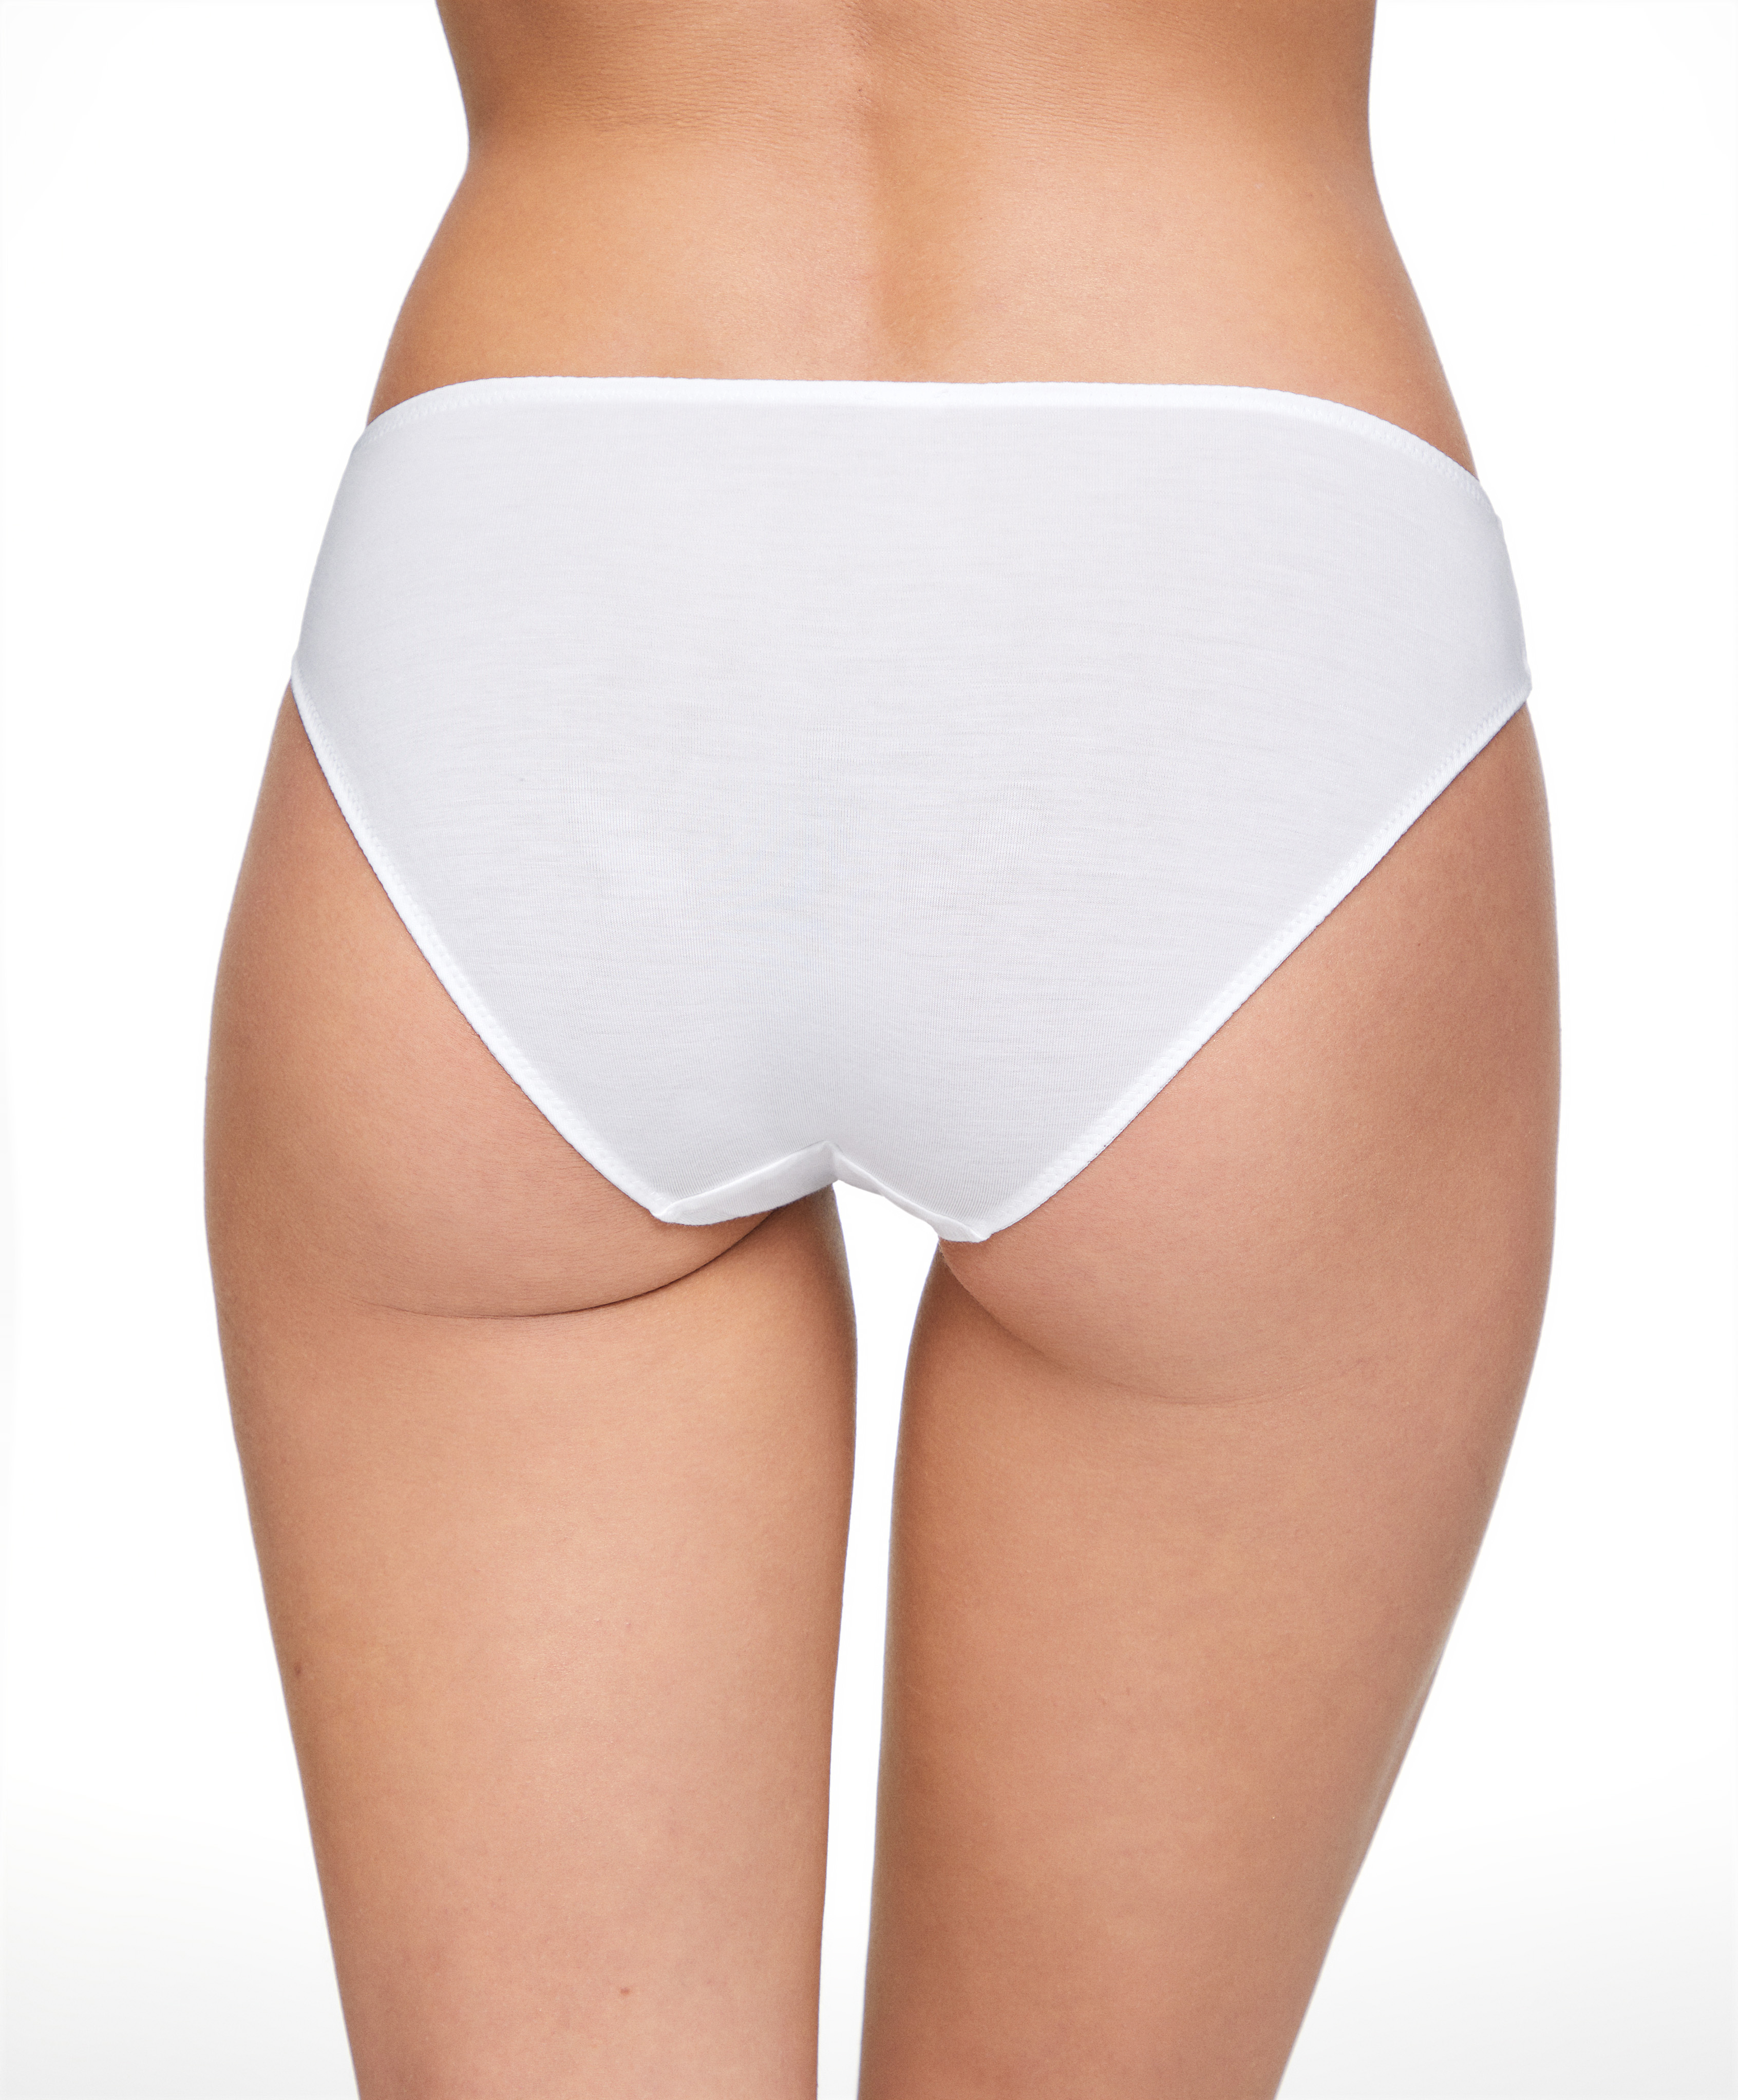 3 classic briefs with bamboo fibre